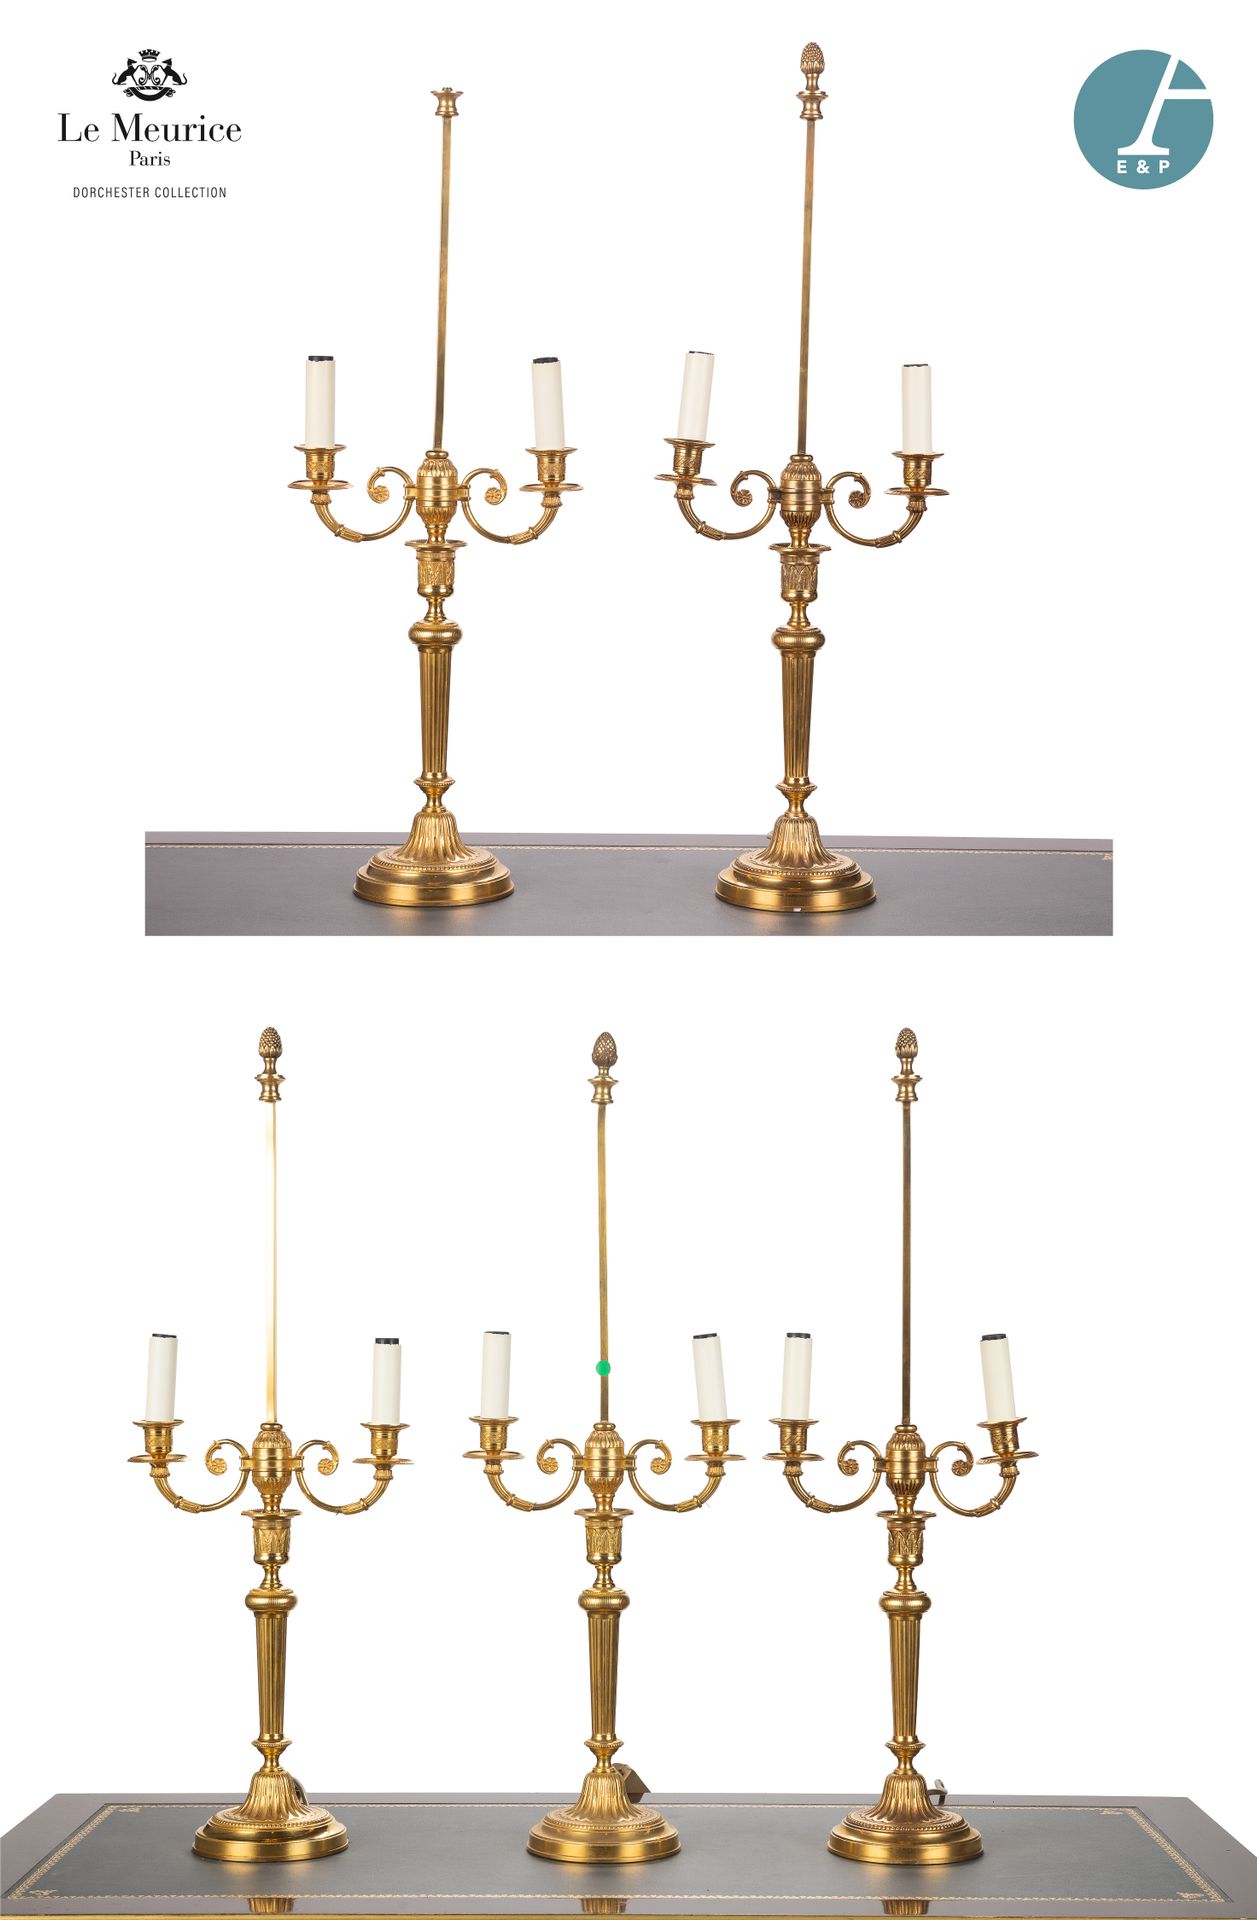 Null From Hôtel Le Meurice.
Set of five ormolu lampstands, with two scrolled lig&hellip;